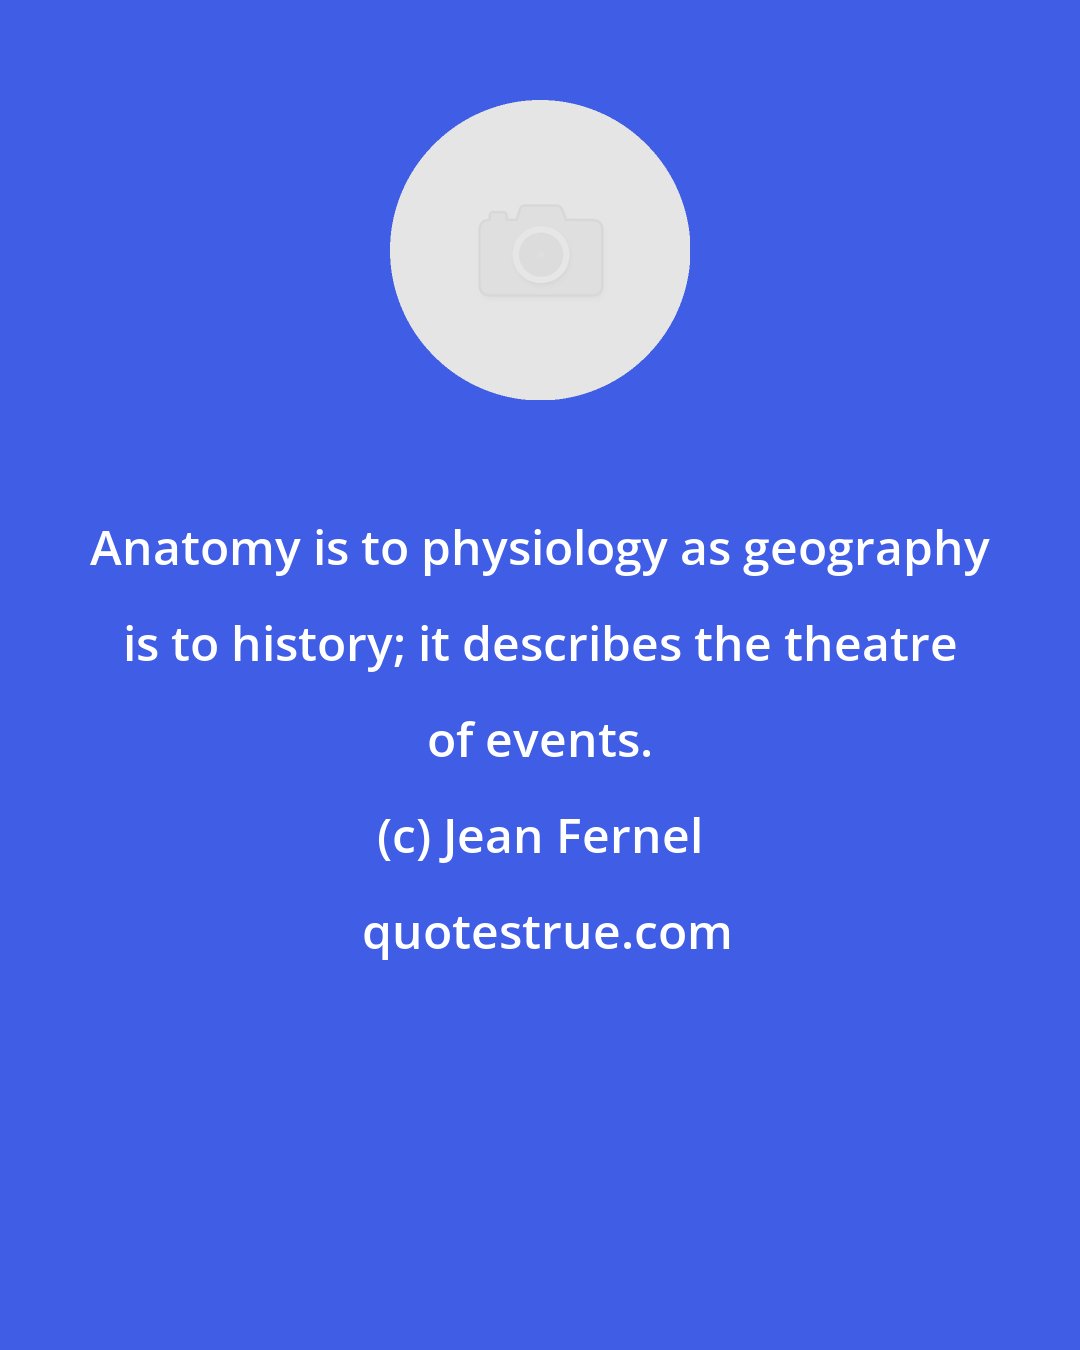 Jean Fernel: Anatomy is to physiology as geography is to history; it describes the theatre of events.